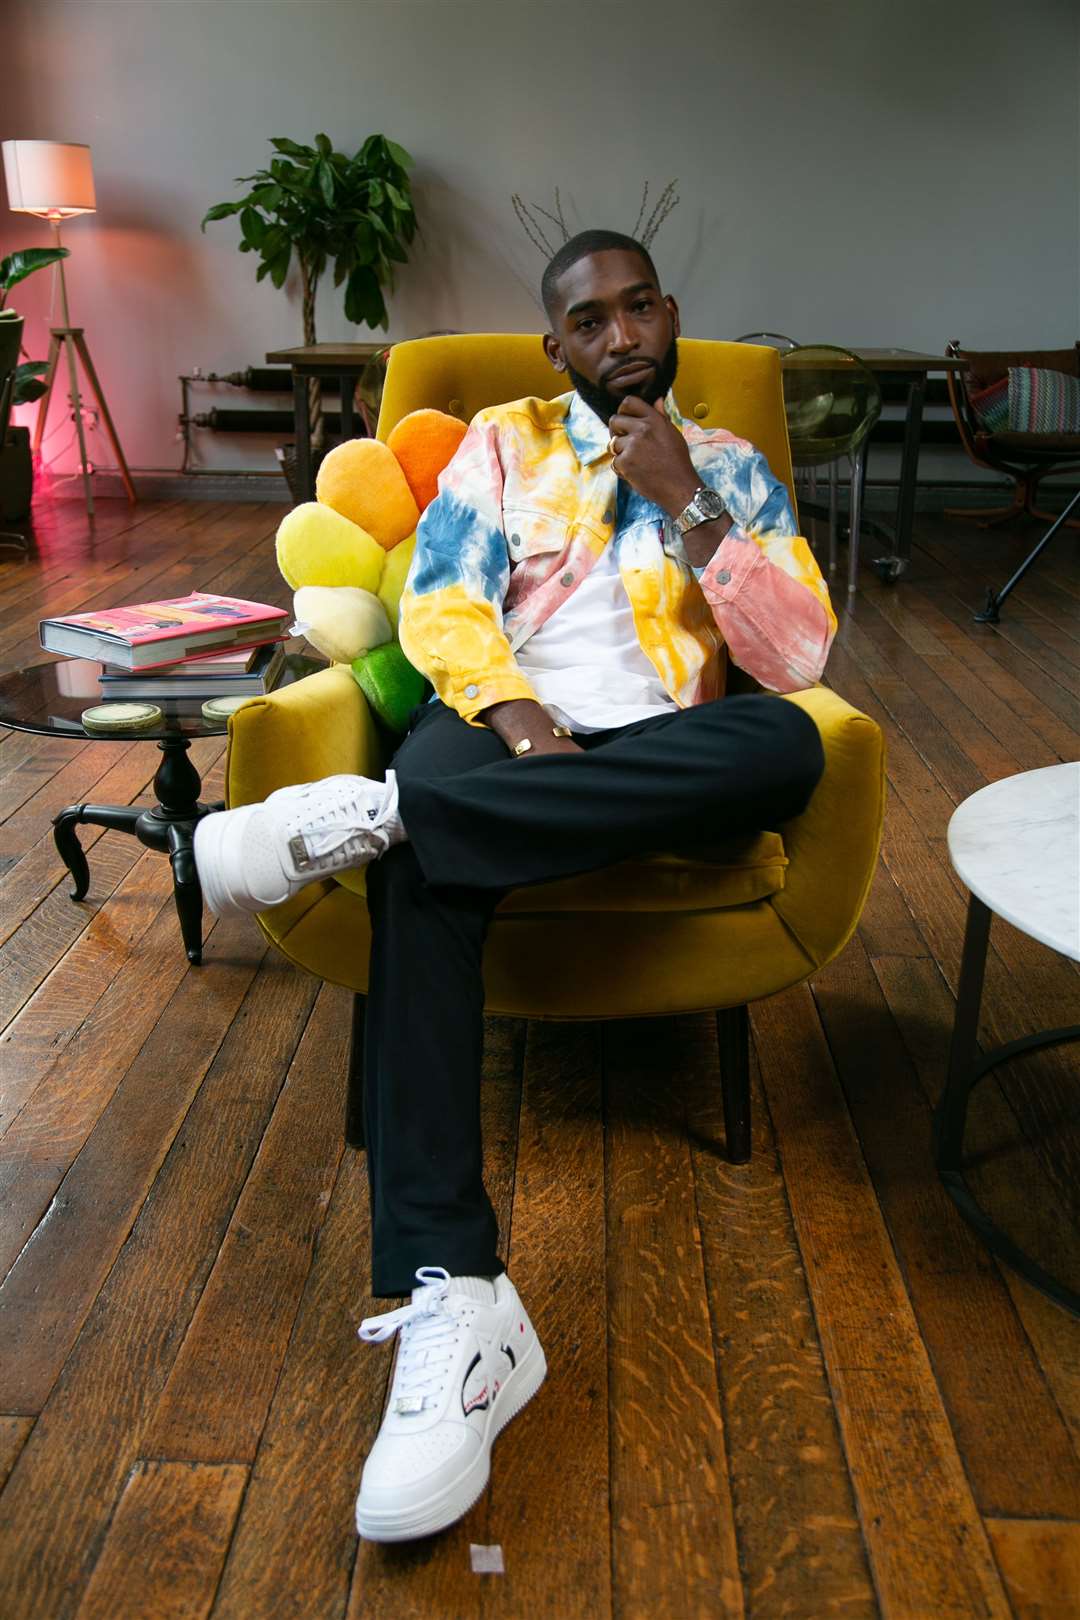 Tinie in Extraordinary Portraits (Chatterbox Media/BBC/PA)